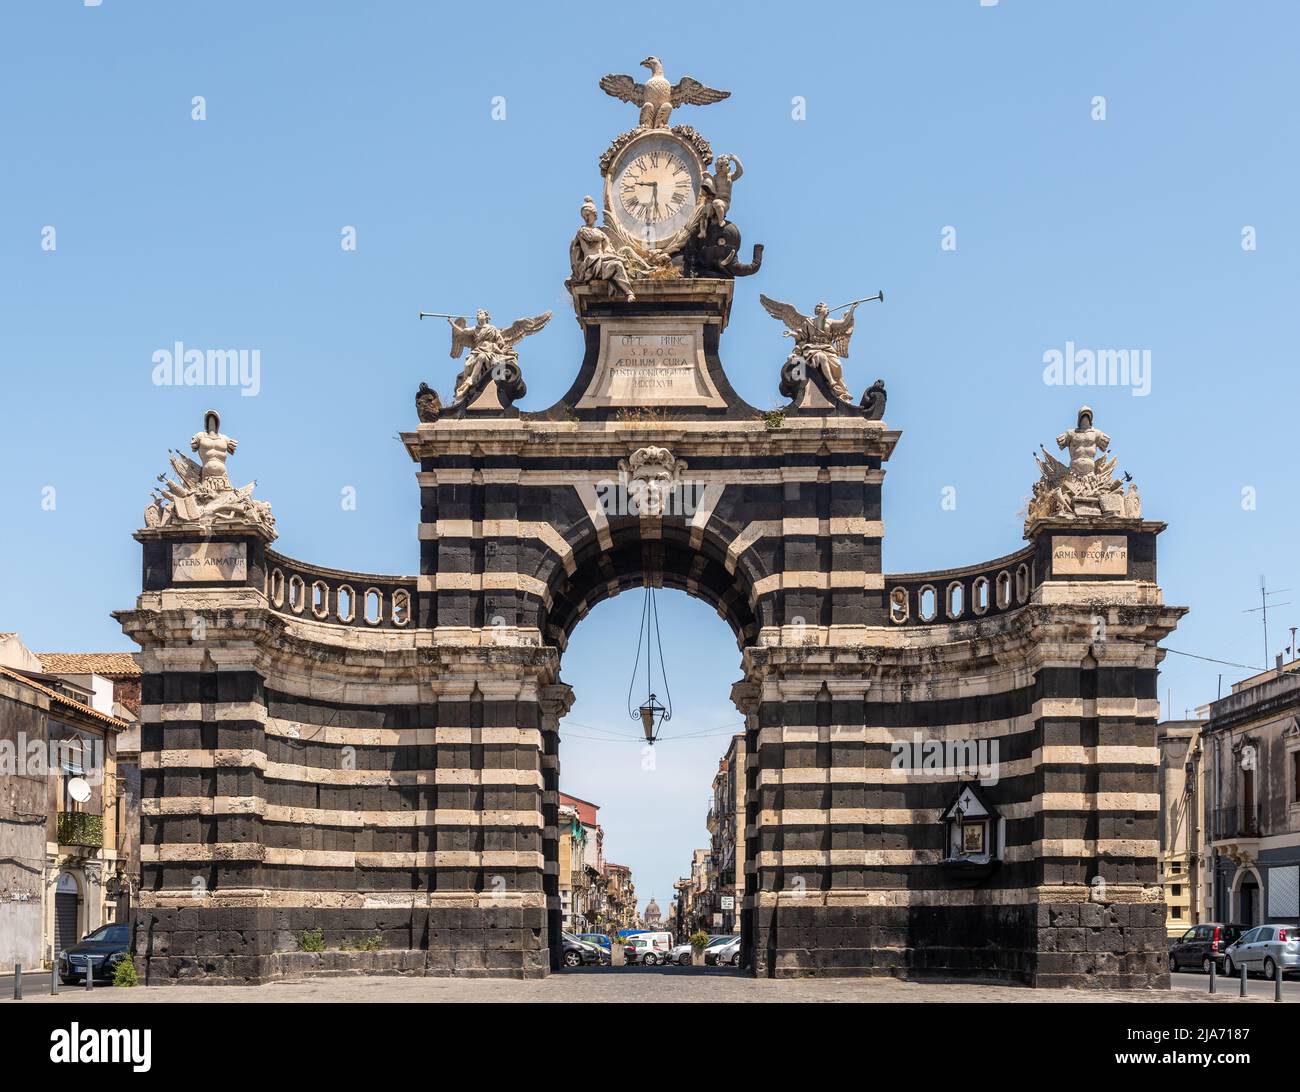 The Porta Garibaldi in Catania, Sicily, Italy, a grand triumphal arch built in 1768 to celebrate the marriage of King Ferdinand I Stock Photo